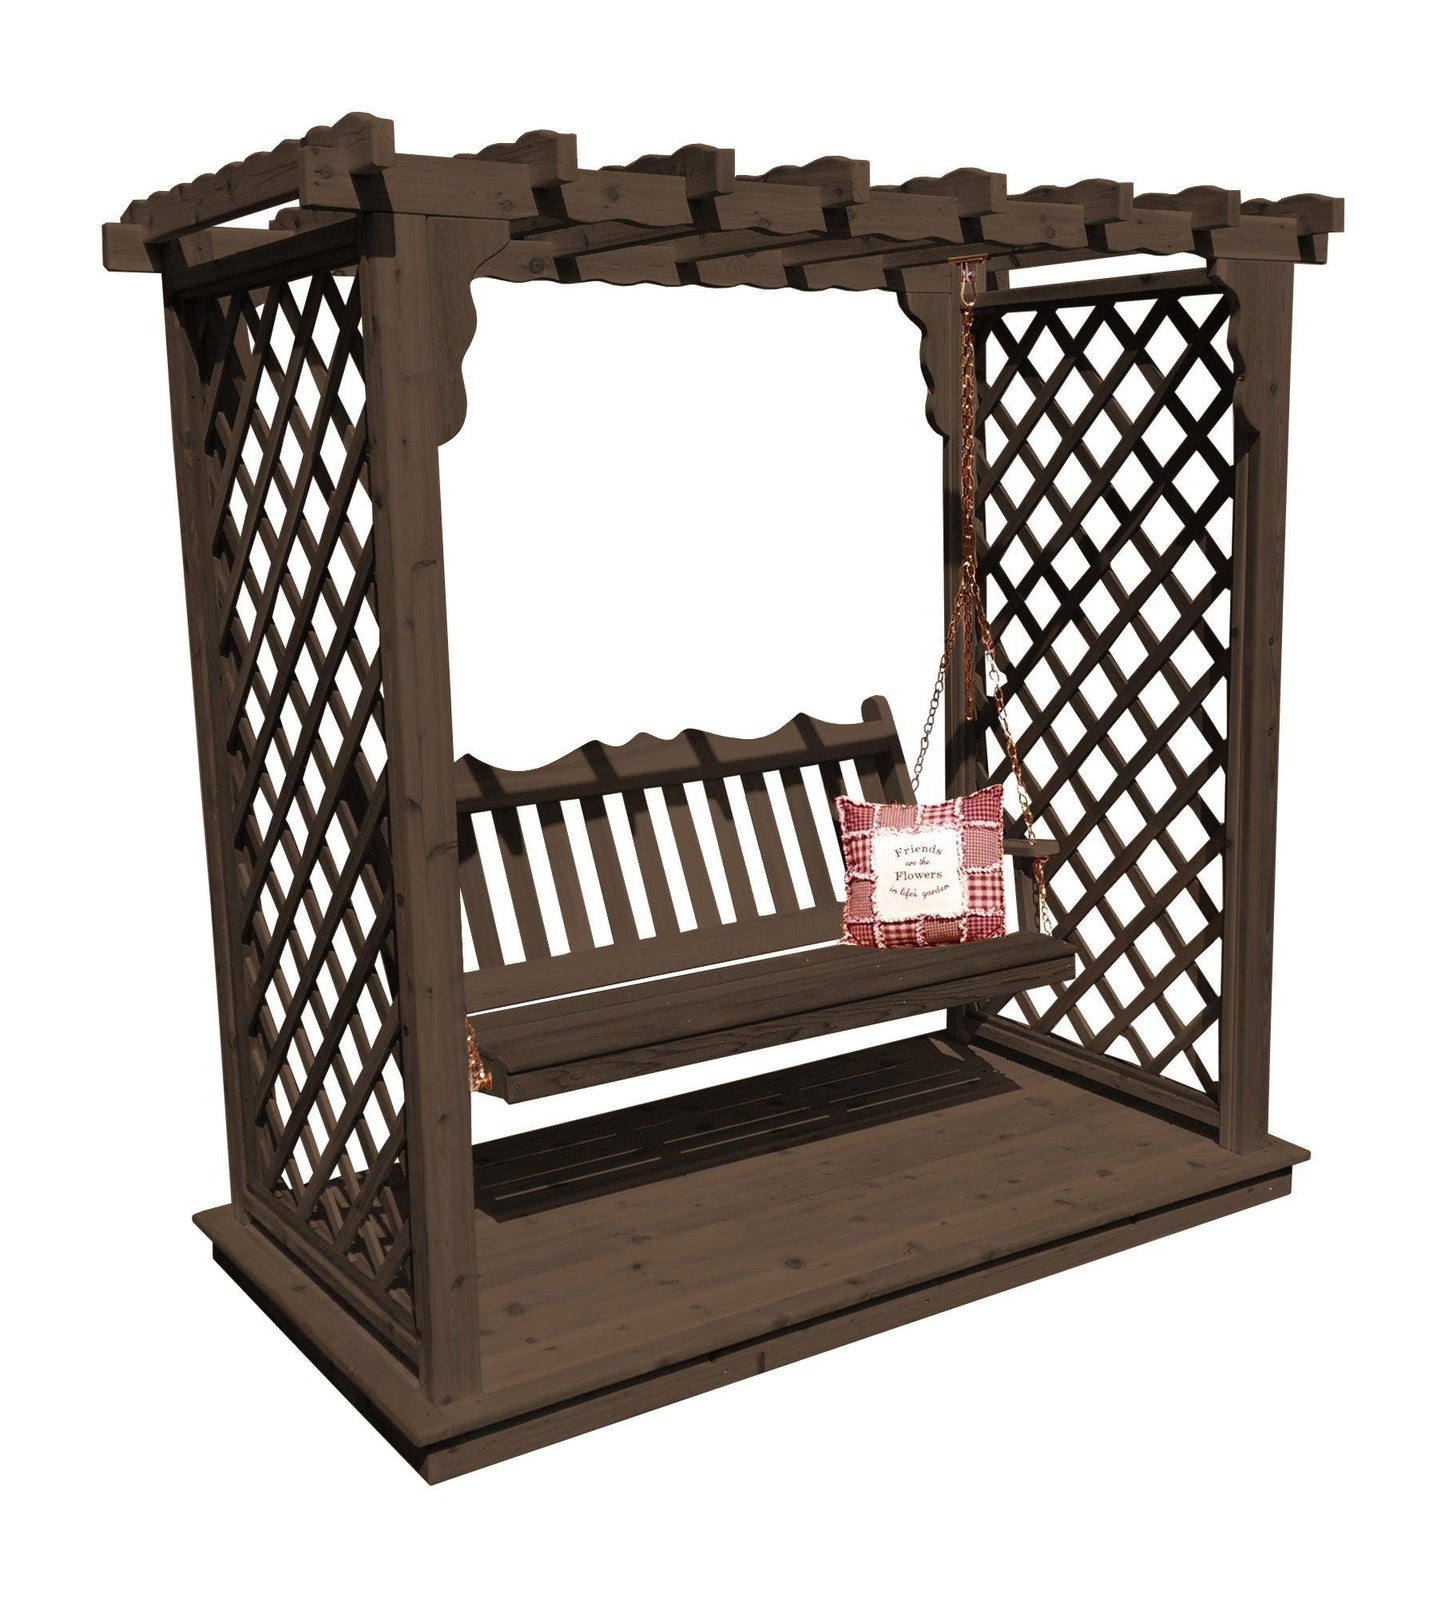 A&L FURNITURE CO. 5' Covington Pressure Treated Pine Arbor w/ Deck & Swing - LEAD TIME TO SHIP 10 BUSINESS DAYS